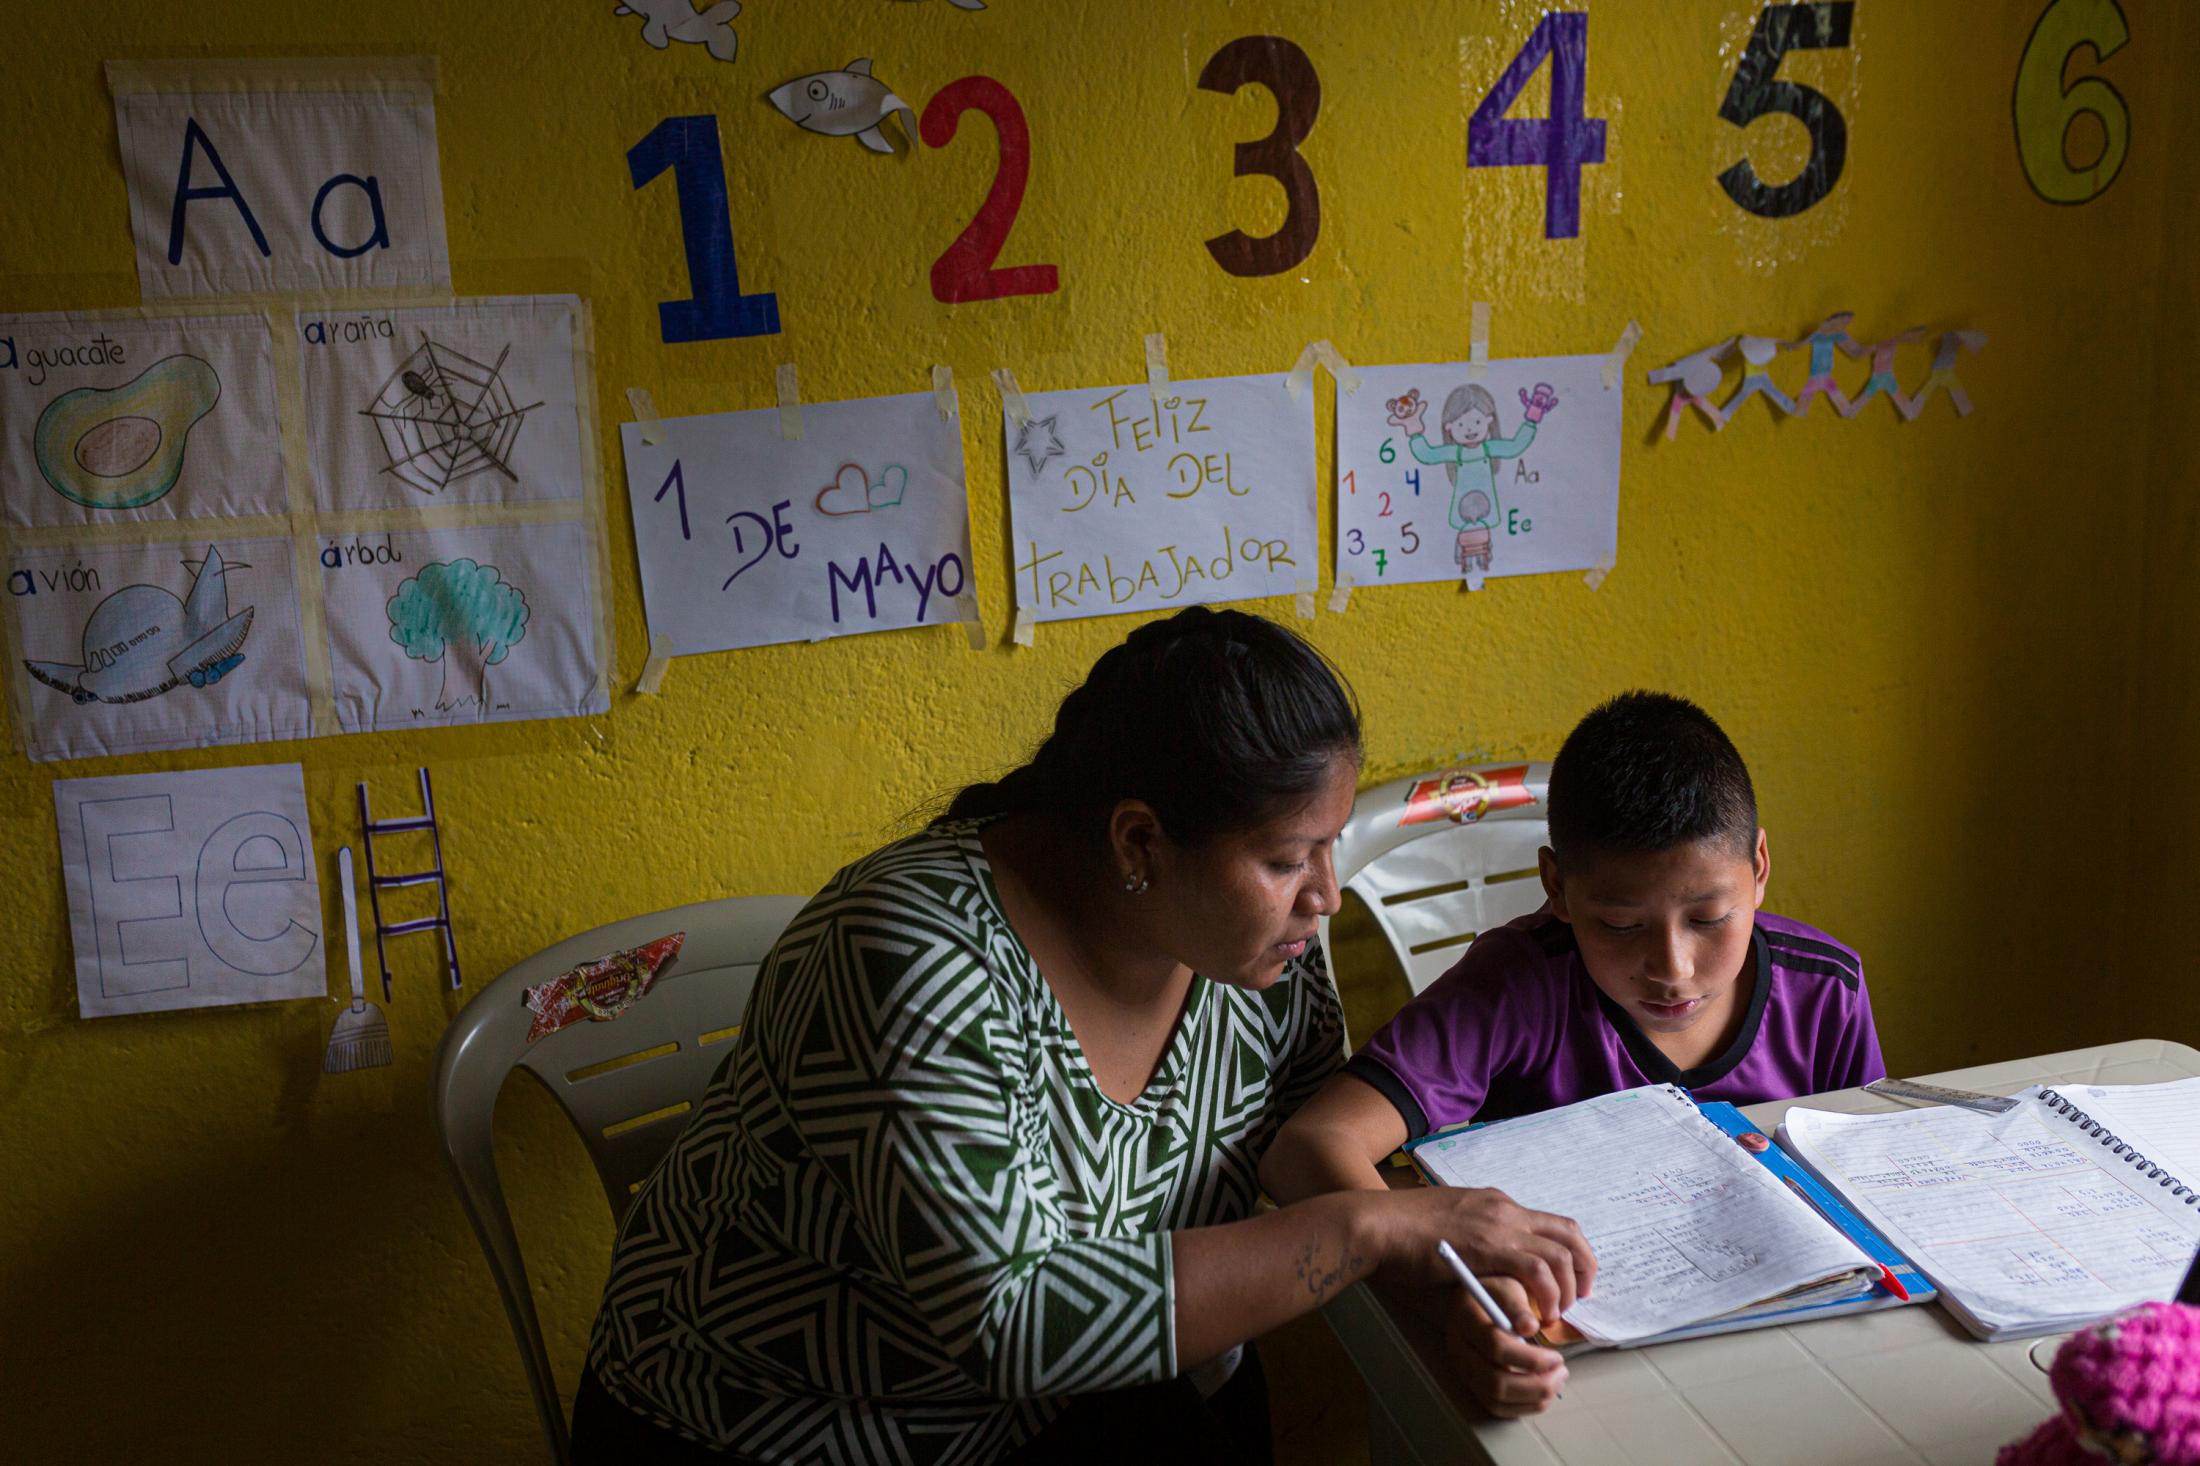 Erika Pozo helps her nephew Josthyn Neira (12), a seventh grade student at Ruperto Alarc&oacute;n Falcon&iacute; School, to do some math operations that are part of the homework that his teacher sends him through whatsapp daily. Josthyn lives together with her aunt&#39;s family in the central part of the parish of Cotogchoa where there is the possibility of hiring internet home service. However, they don&#39;t have money to have that service, but a neighbor shares her wifi network so Jhostyn and one of his cousins can access their homework. May 29, 2020. Cotogchoa-Ecuador. Andr&eacute;s Y&eacute;pez.